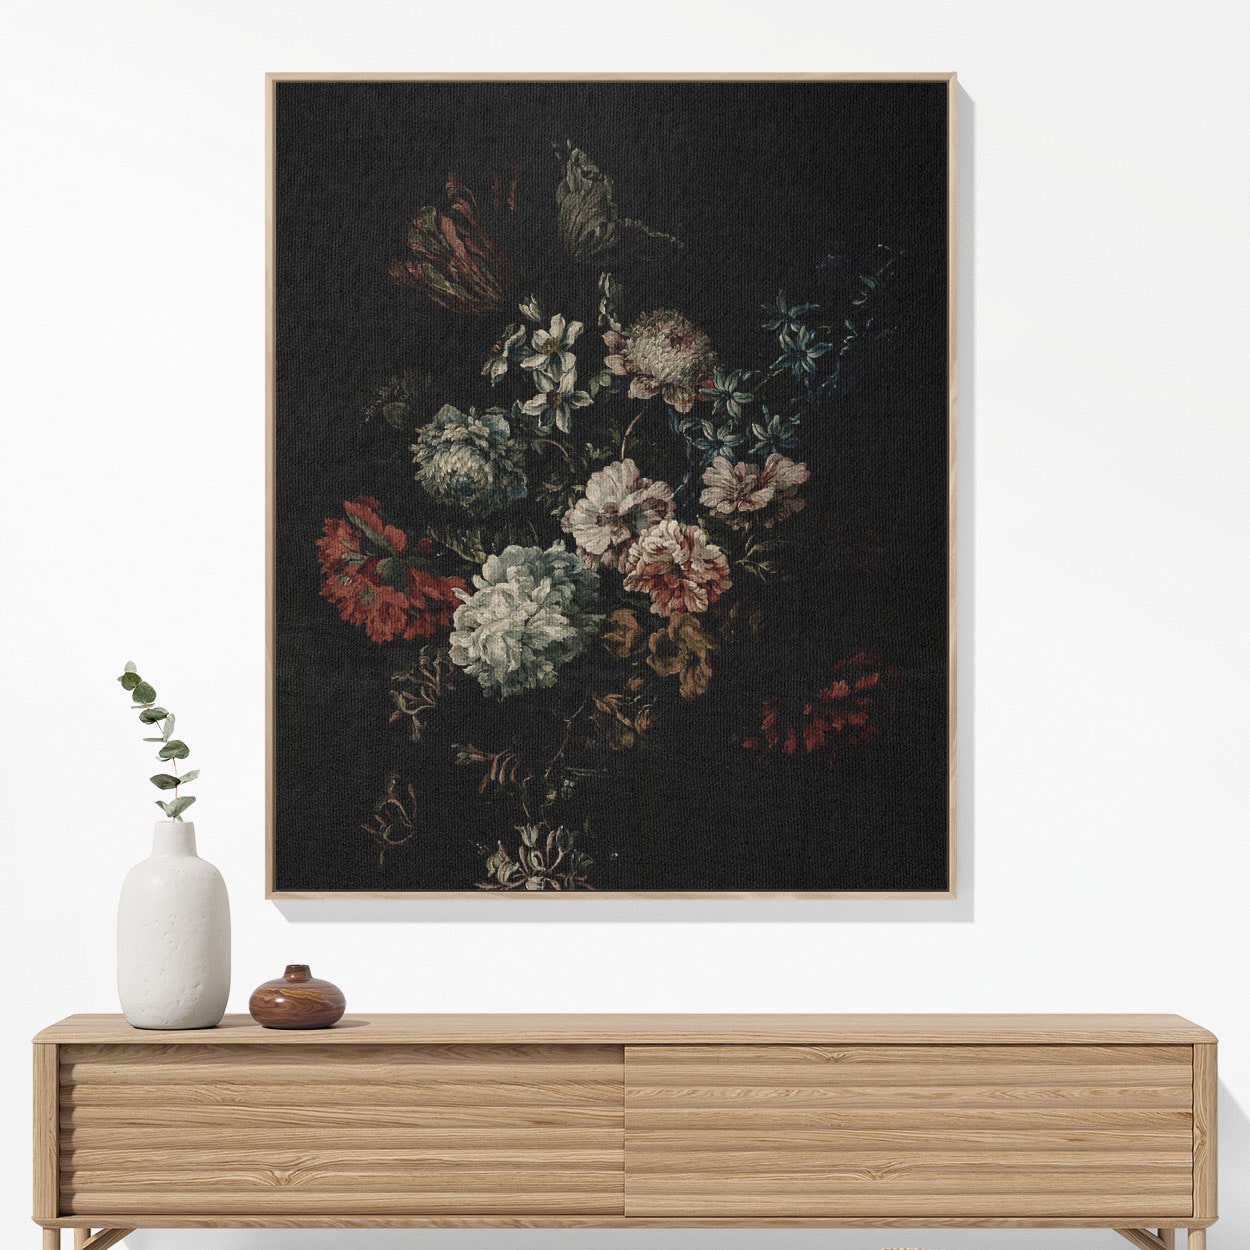 Dark Floral Woven Blanket Woven Blanket Hanging on a Wall as Framed Wall Art